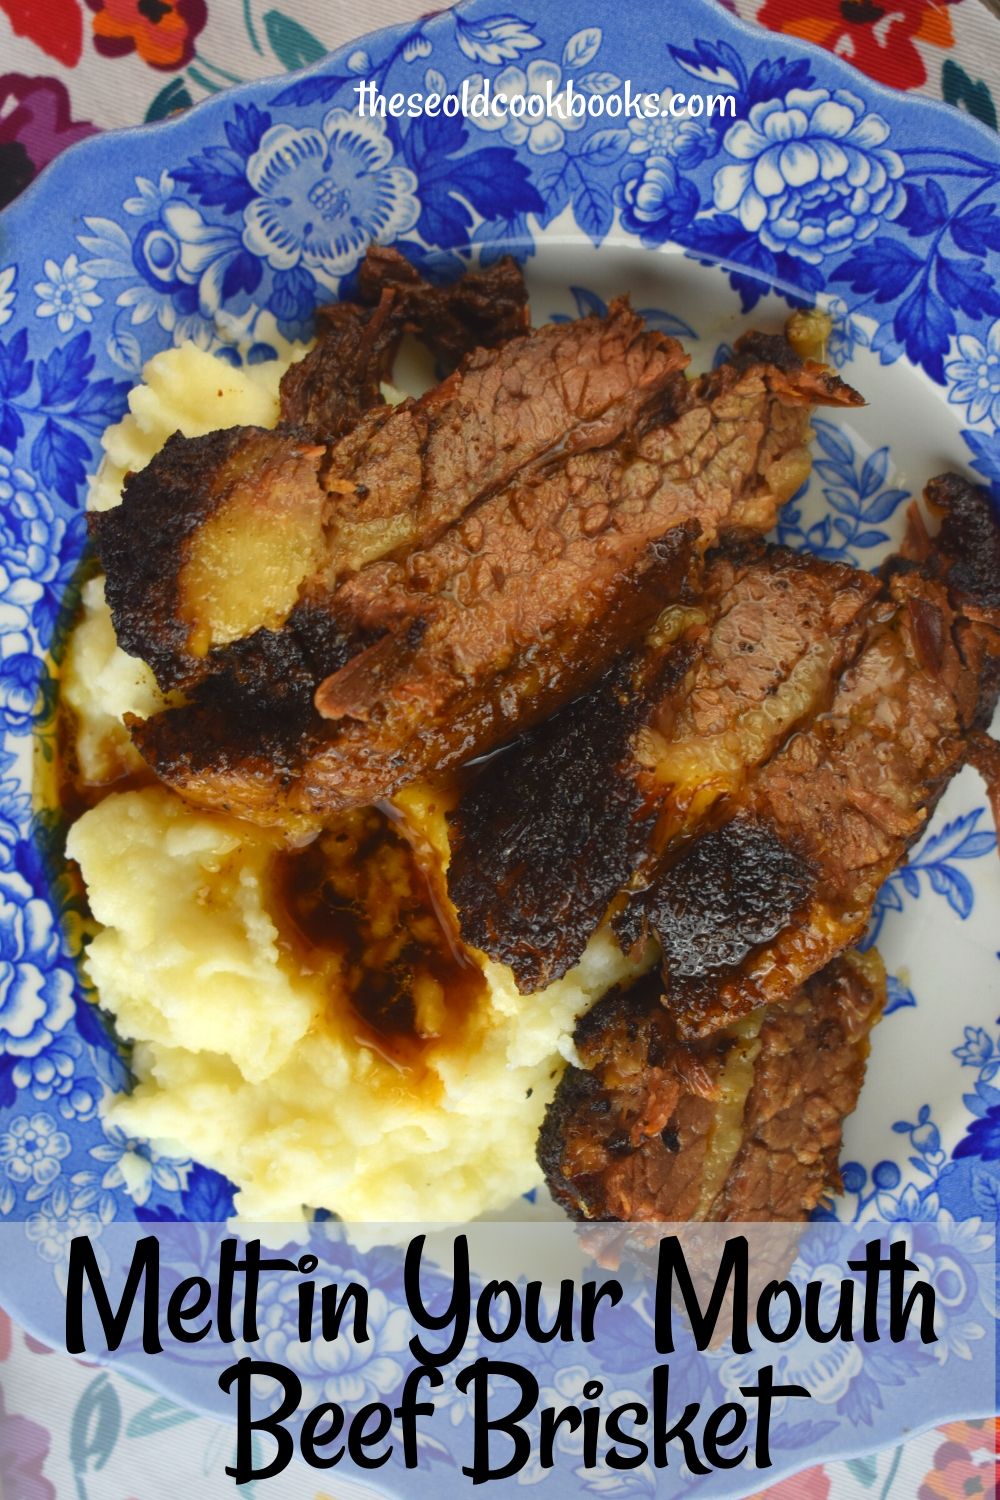 Classic Beef Brisket includes an easy brisket rub recipe and a slow cooked oven method.  The result is a juicy, tender, melt-in-your-mouth meal that you will fall in love with and continue to make time and time again. 